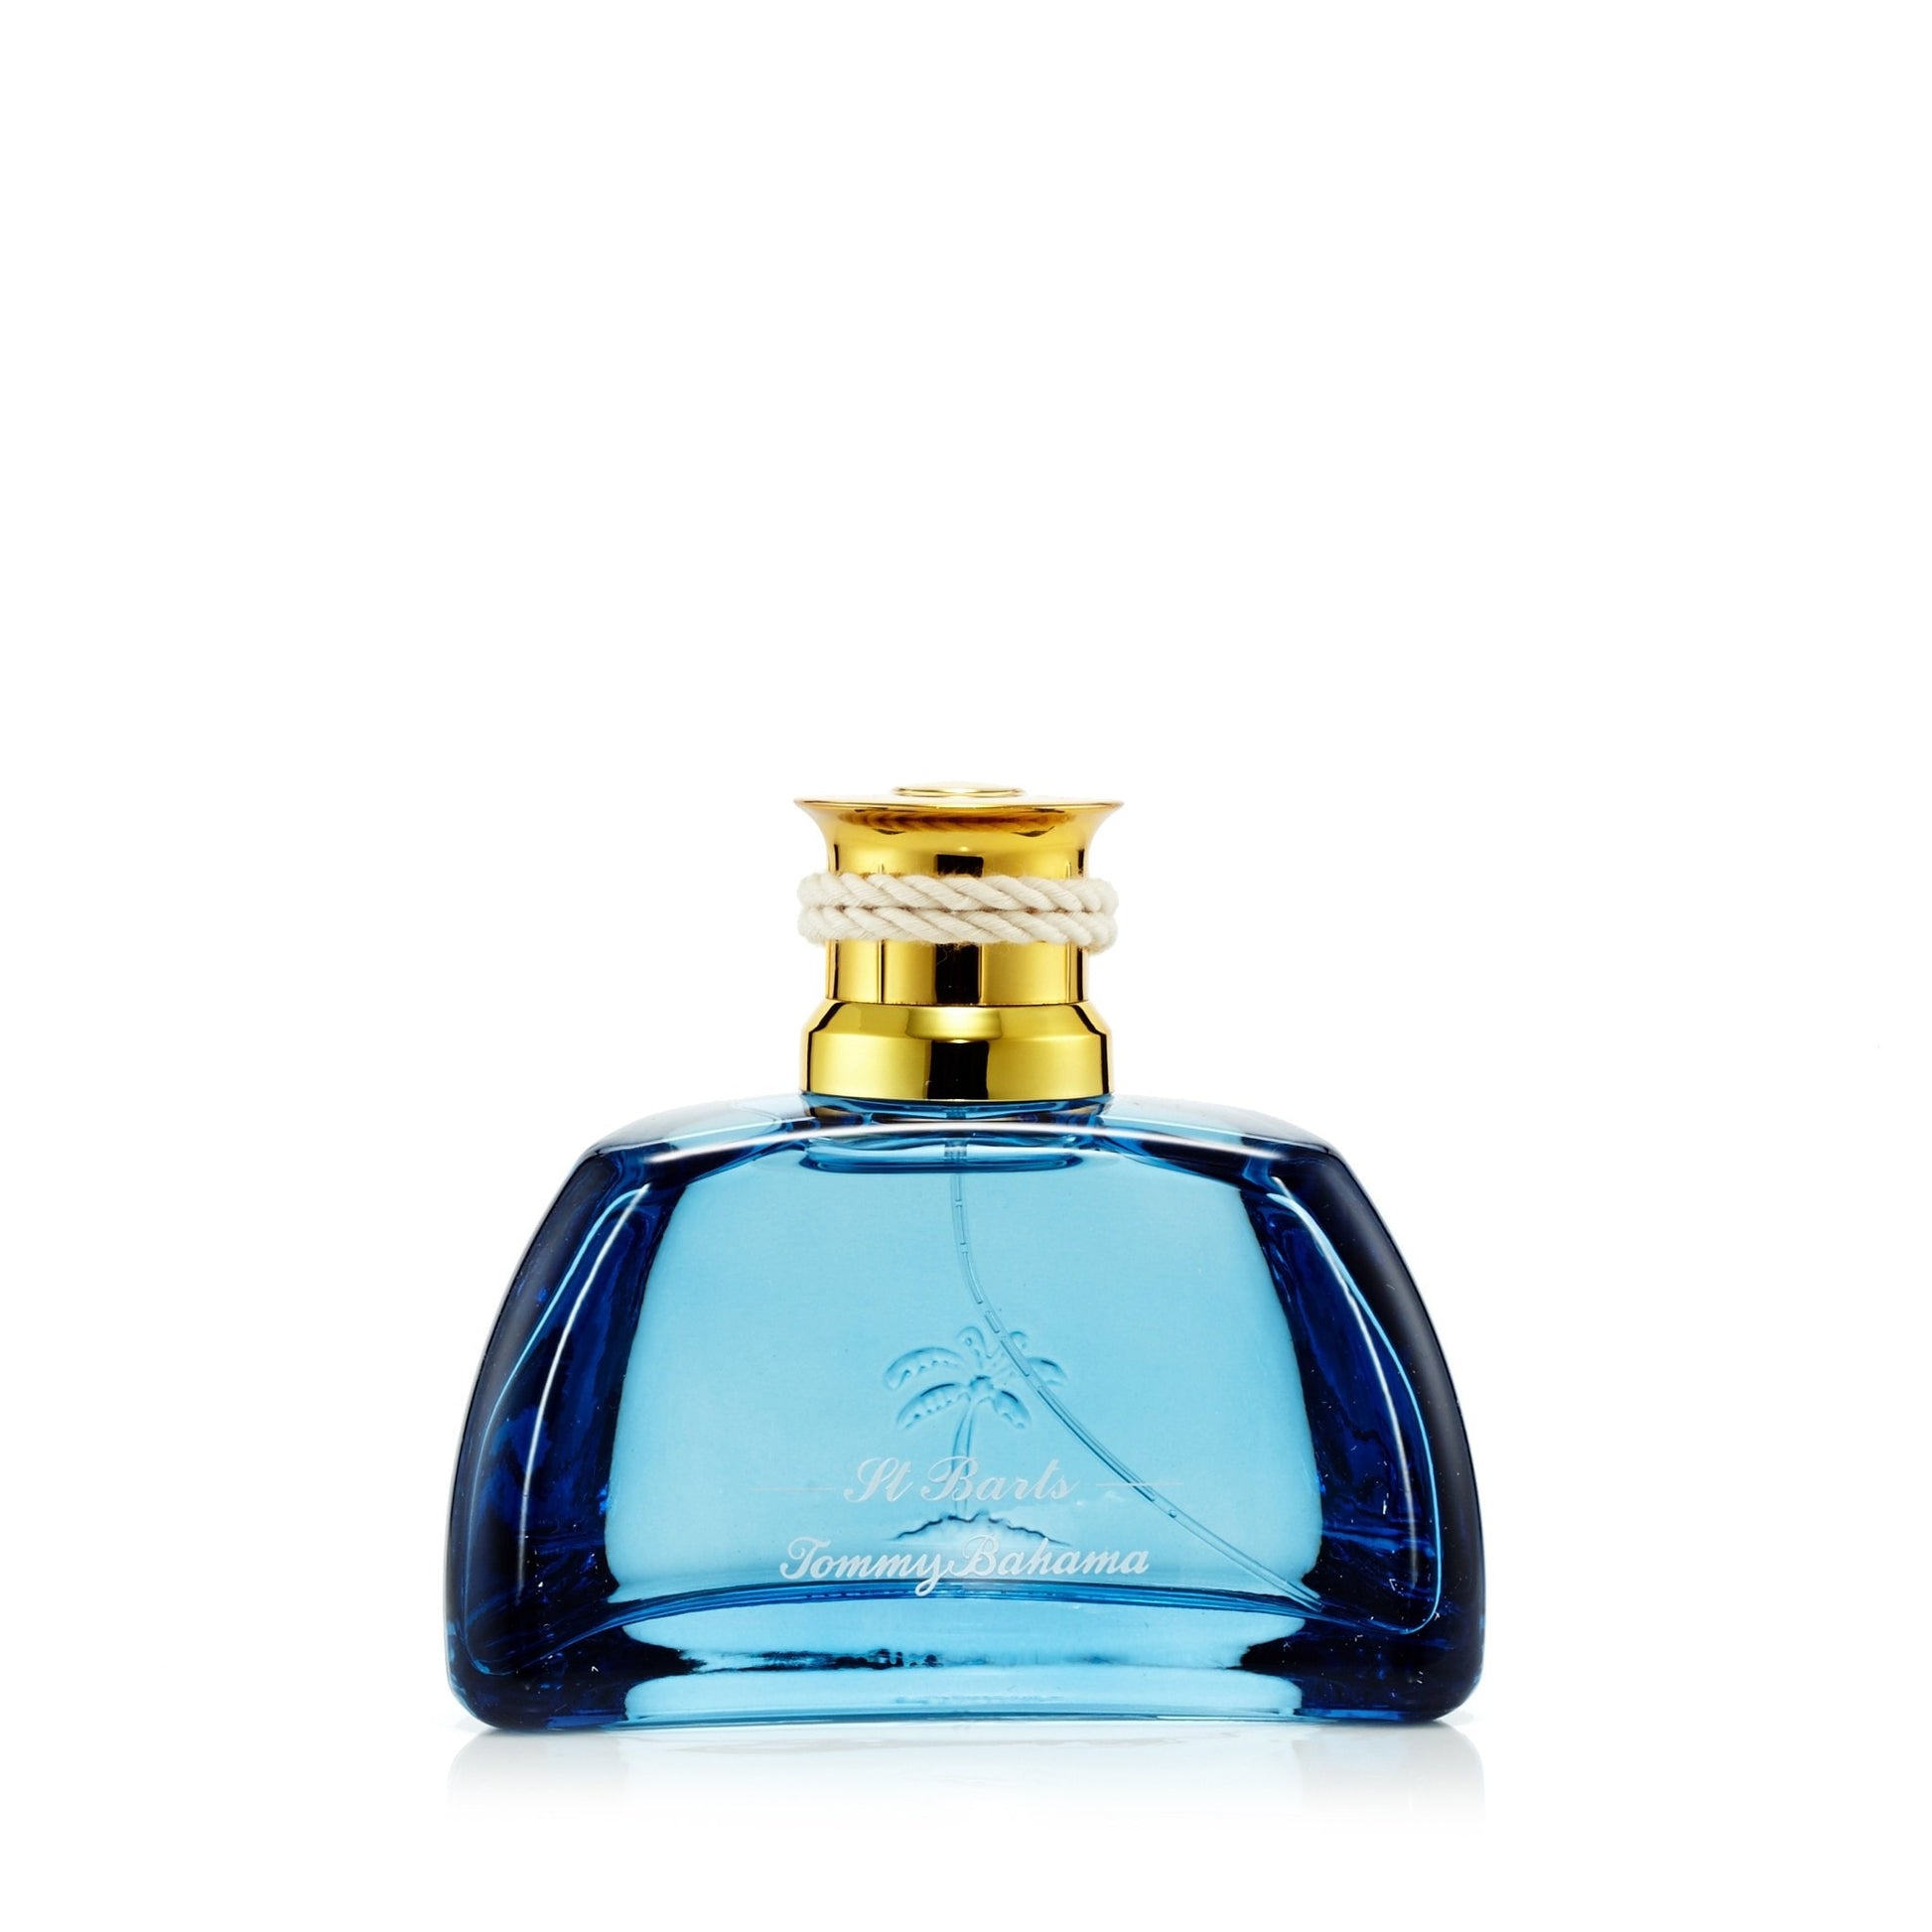 St. Barts Eau de Cologne Spray for Men by Tommy Bahama 3.4 oz. Click to open in modal